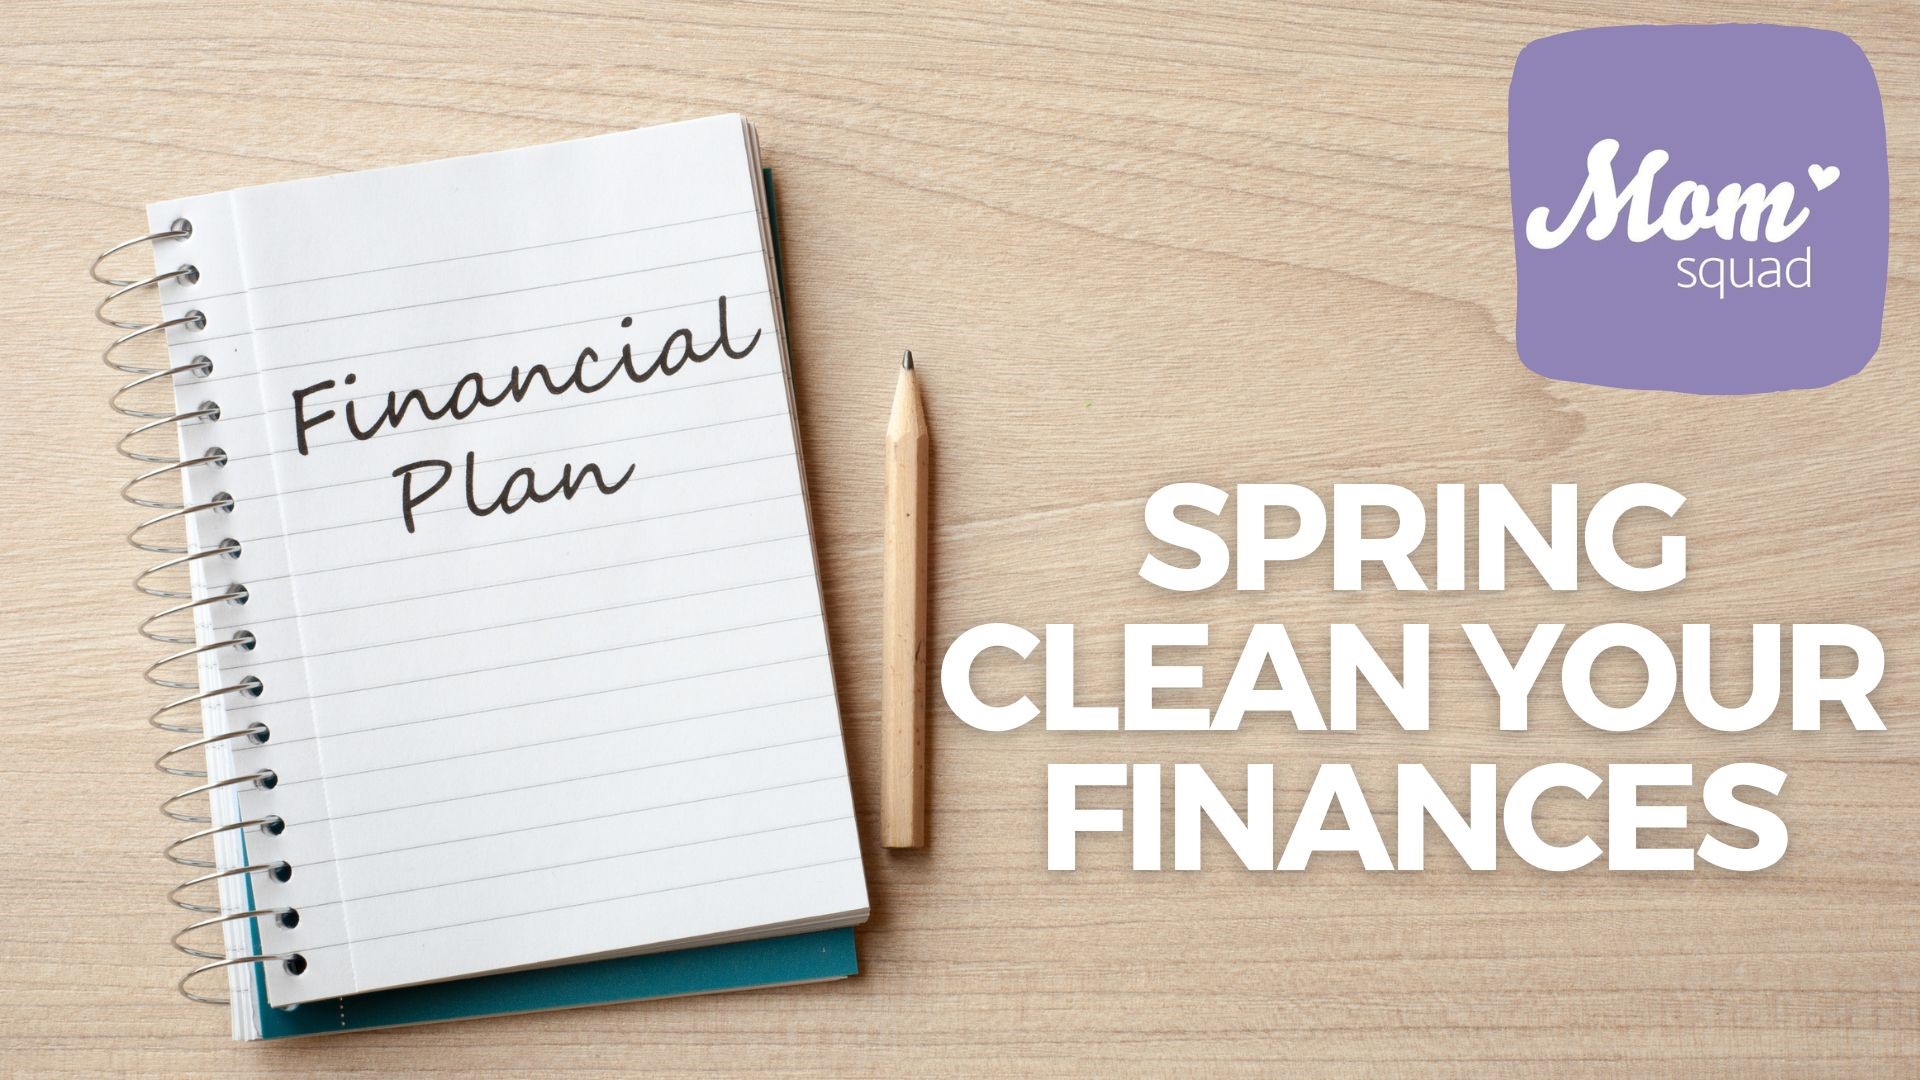 Maureen Kyle sits down with a financial advisor to talk about spring cleaning your finances. Tips on how to cut down on expenses and track your subscriptions.